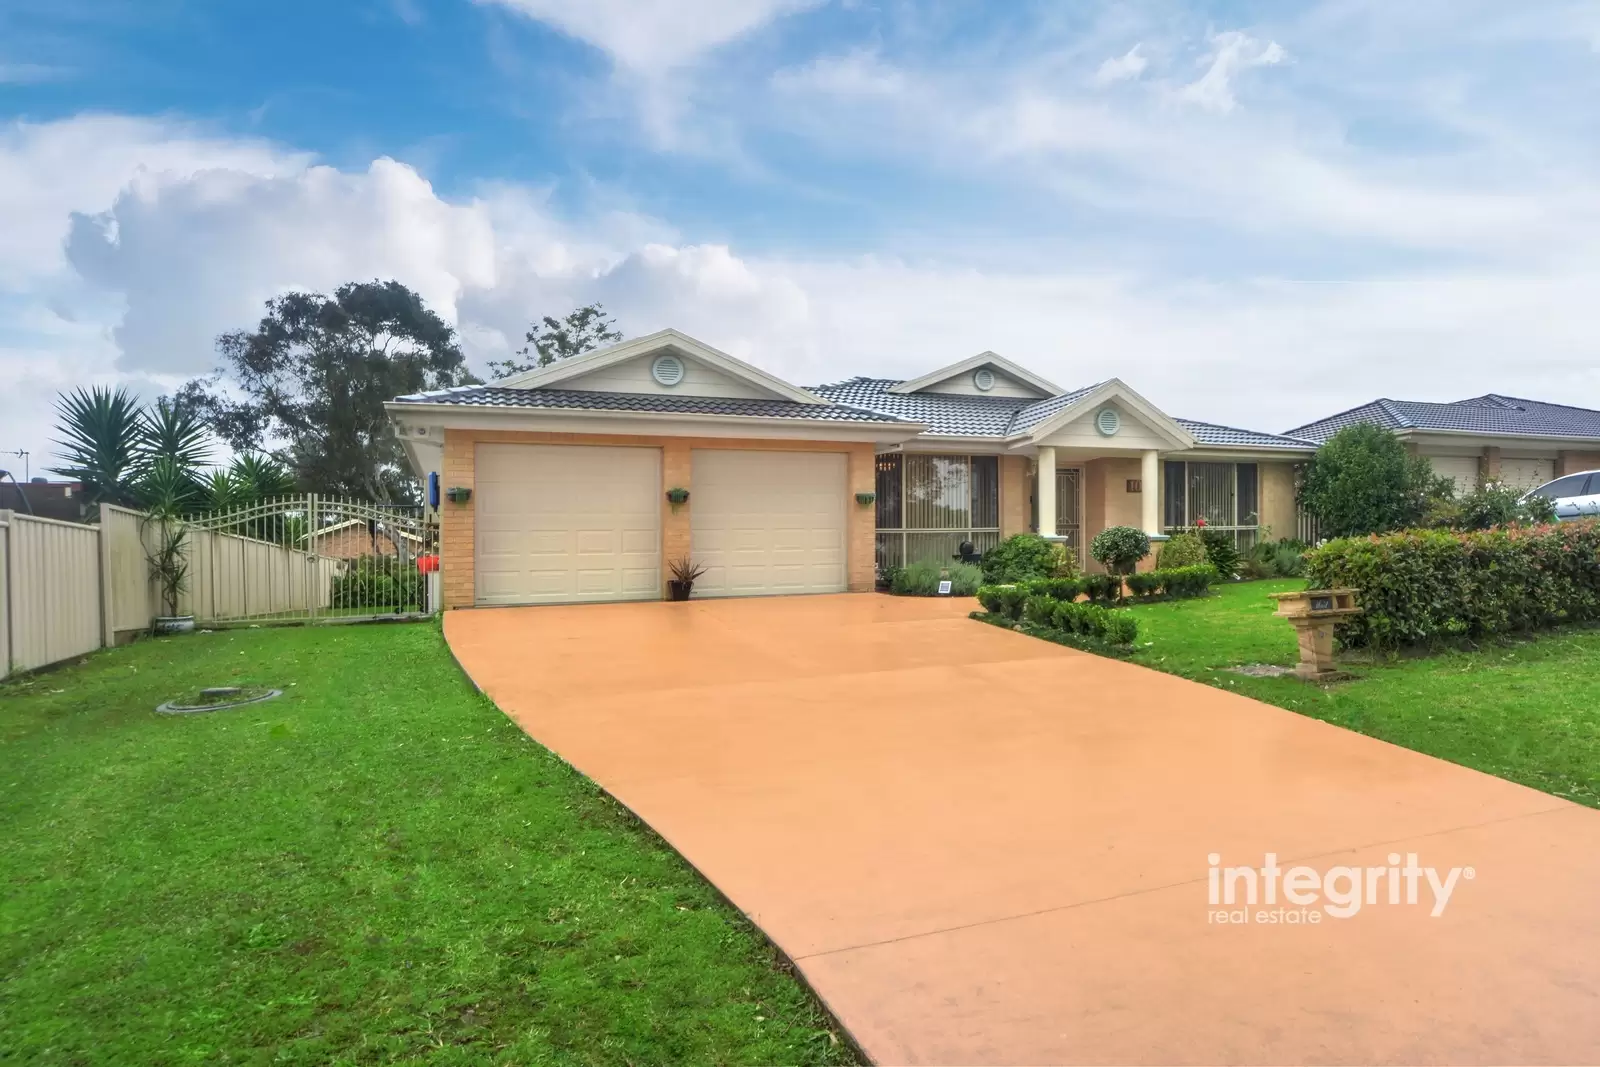 10 Cherry Plum Way, Worrigee Sold by Integrity Real Estate - image 1